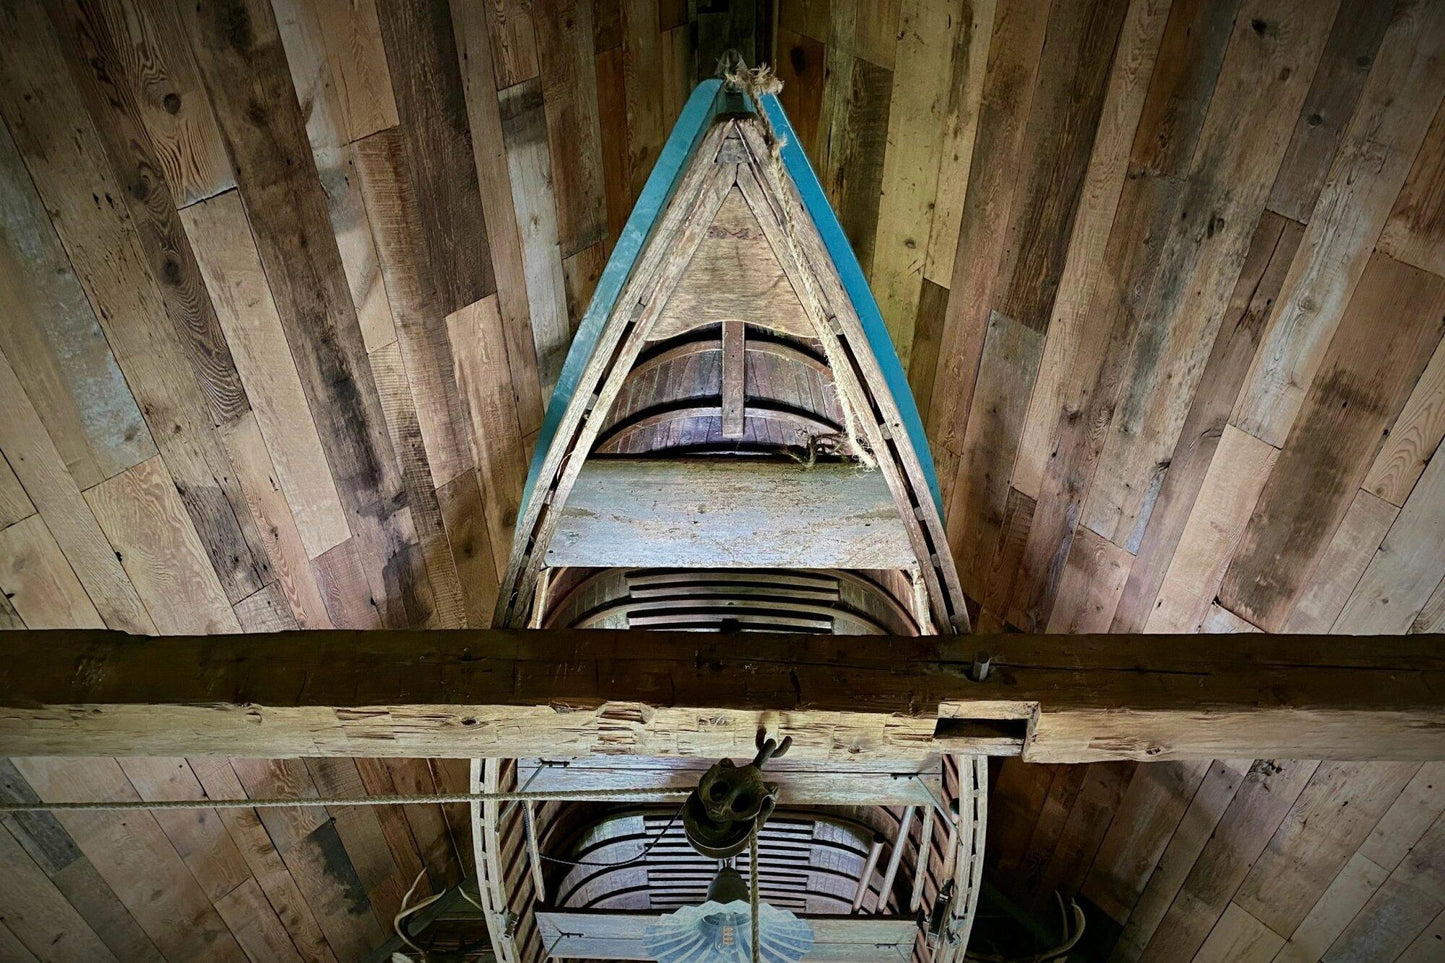 barnwood paneling on a ceiling at a wide angle. Barnwood paneling on wall is varied in width and length, showing many variations and characteristics. An old boat is mounting in the middle of vaulted ceiling.